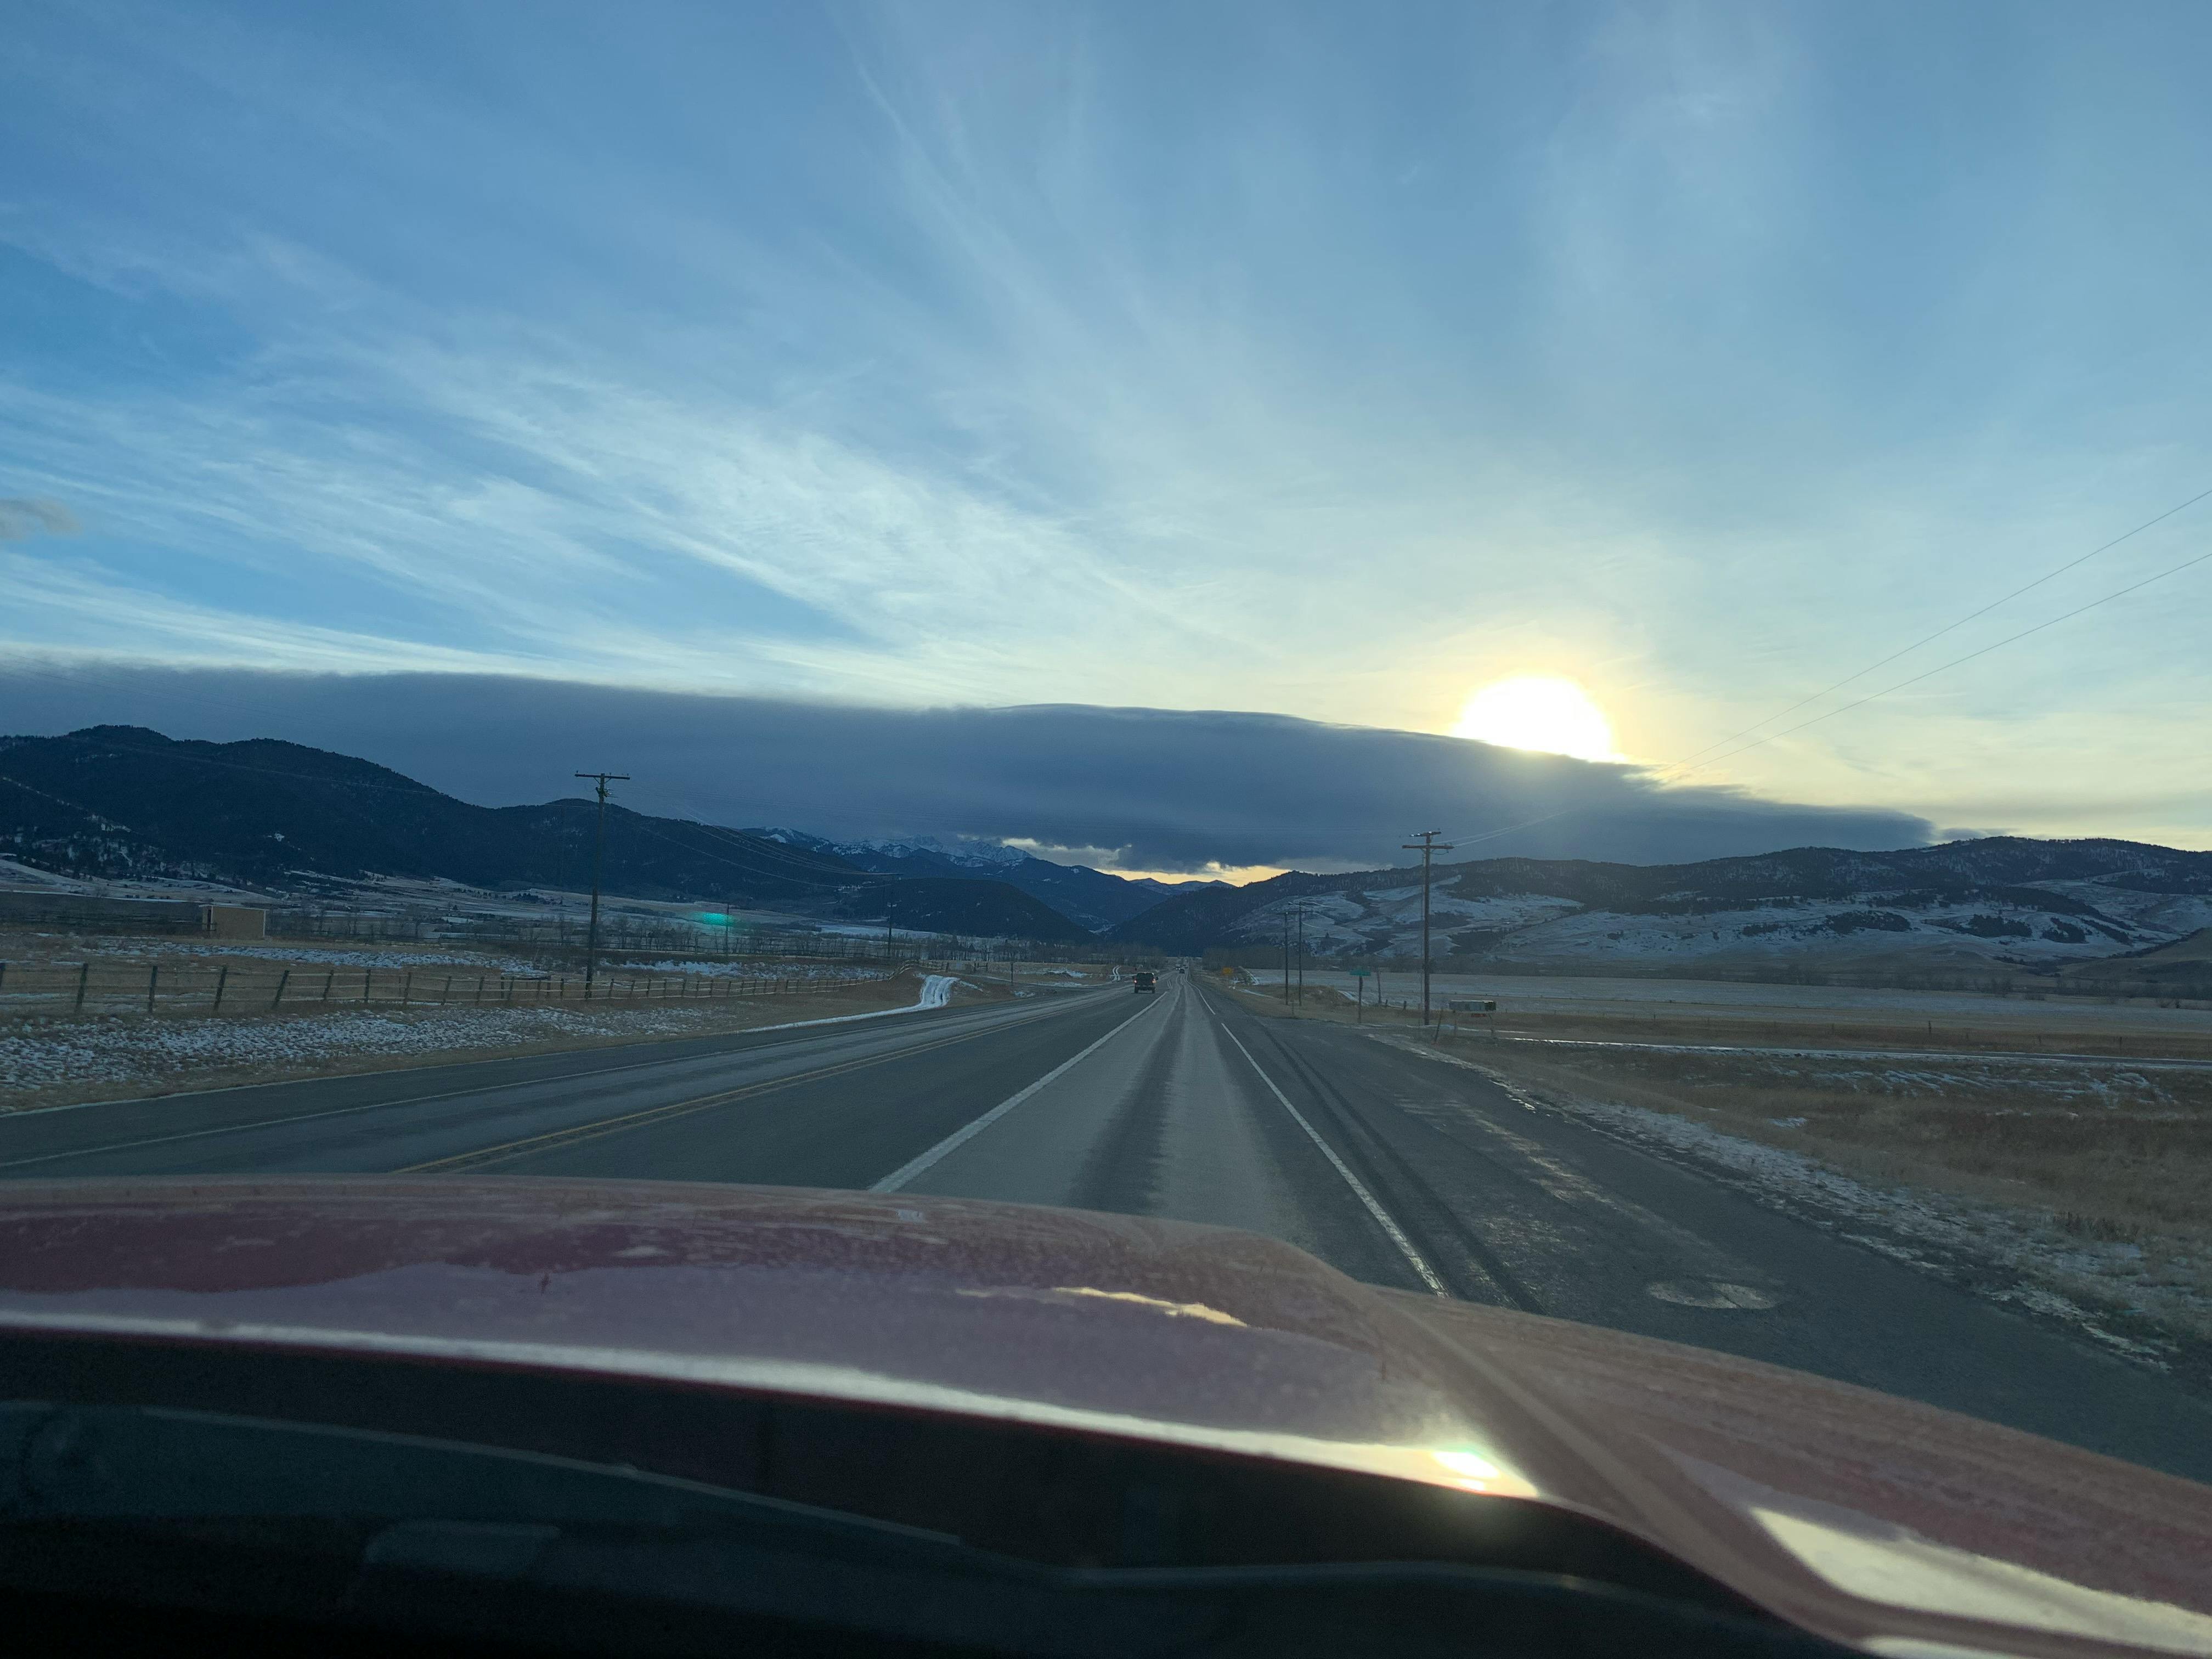 Taken from the passenger seat of a car, the author travels towards snowy hills and the low-lying sun. 